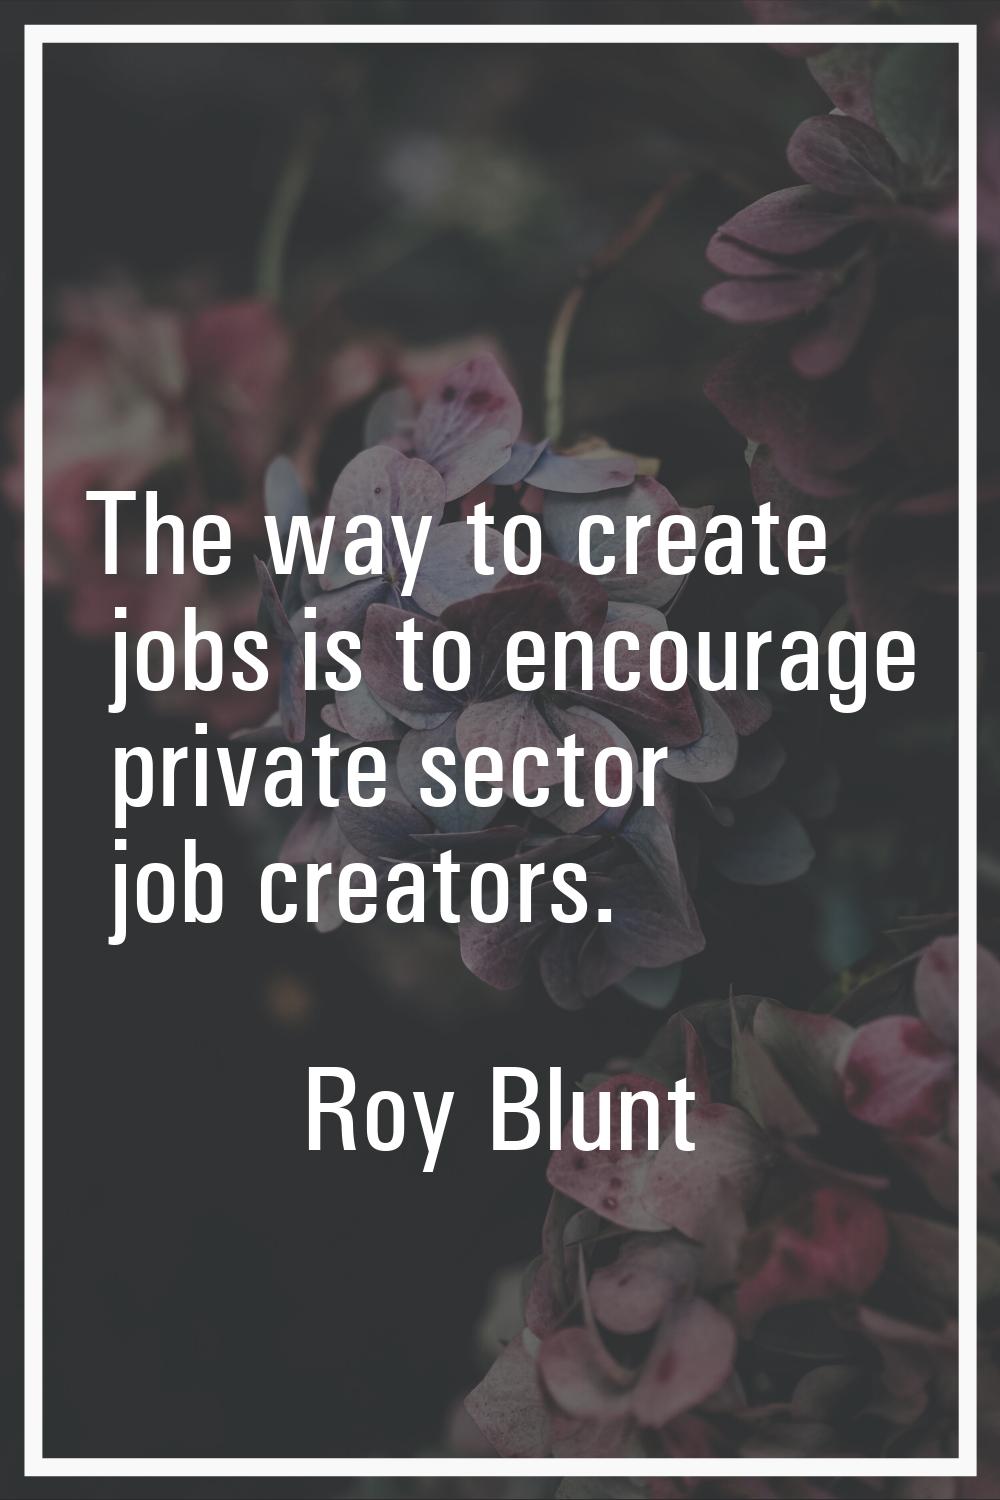 The way to create jobs is to encourage private sector job creators.